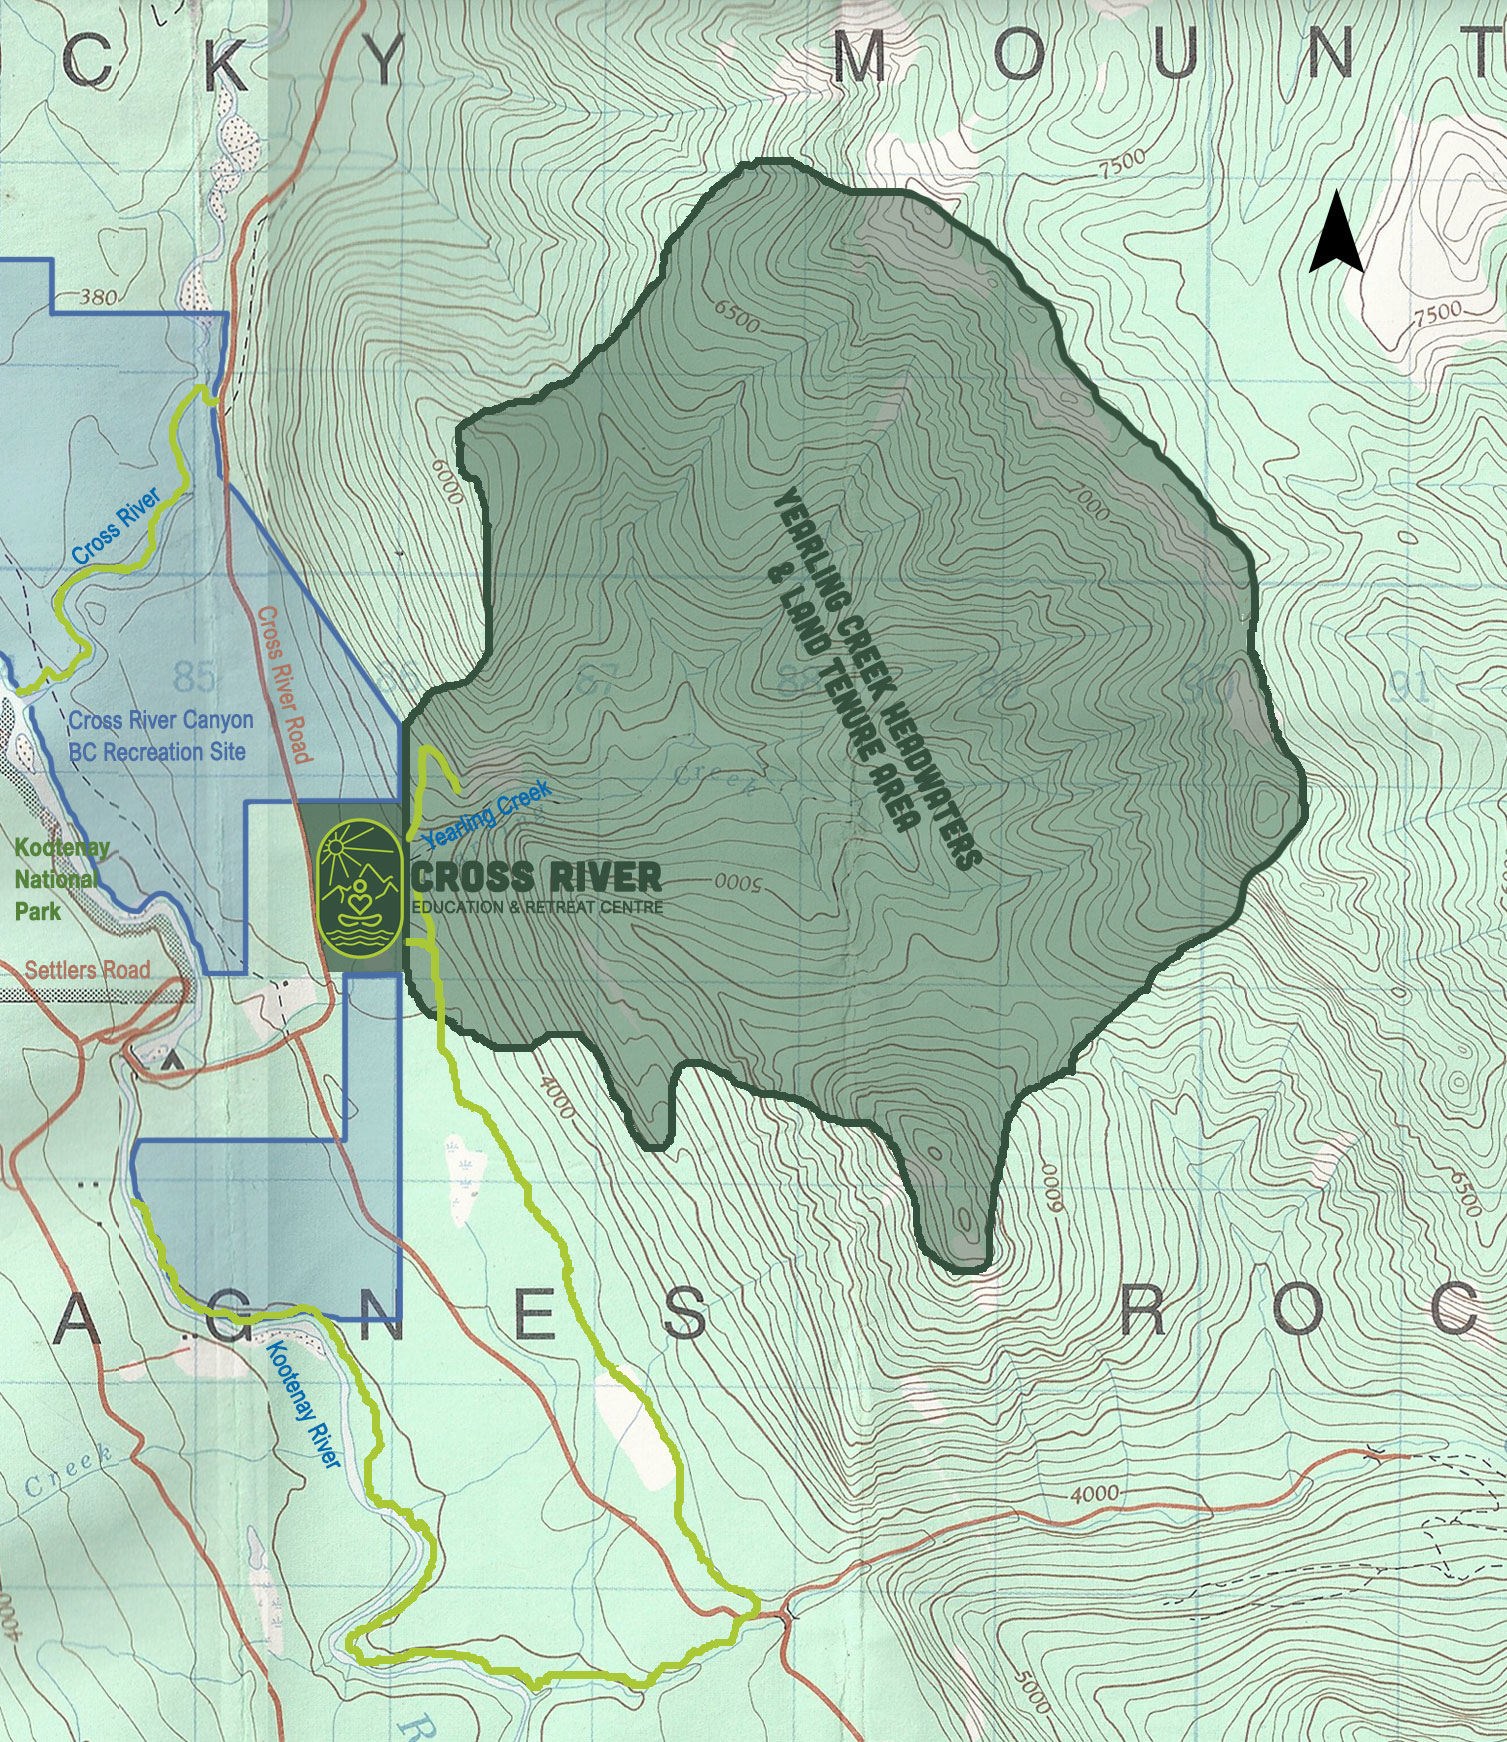 Cross River & BC land tenure agreement area and location map in the Canadian Rockies